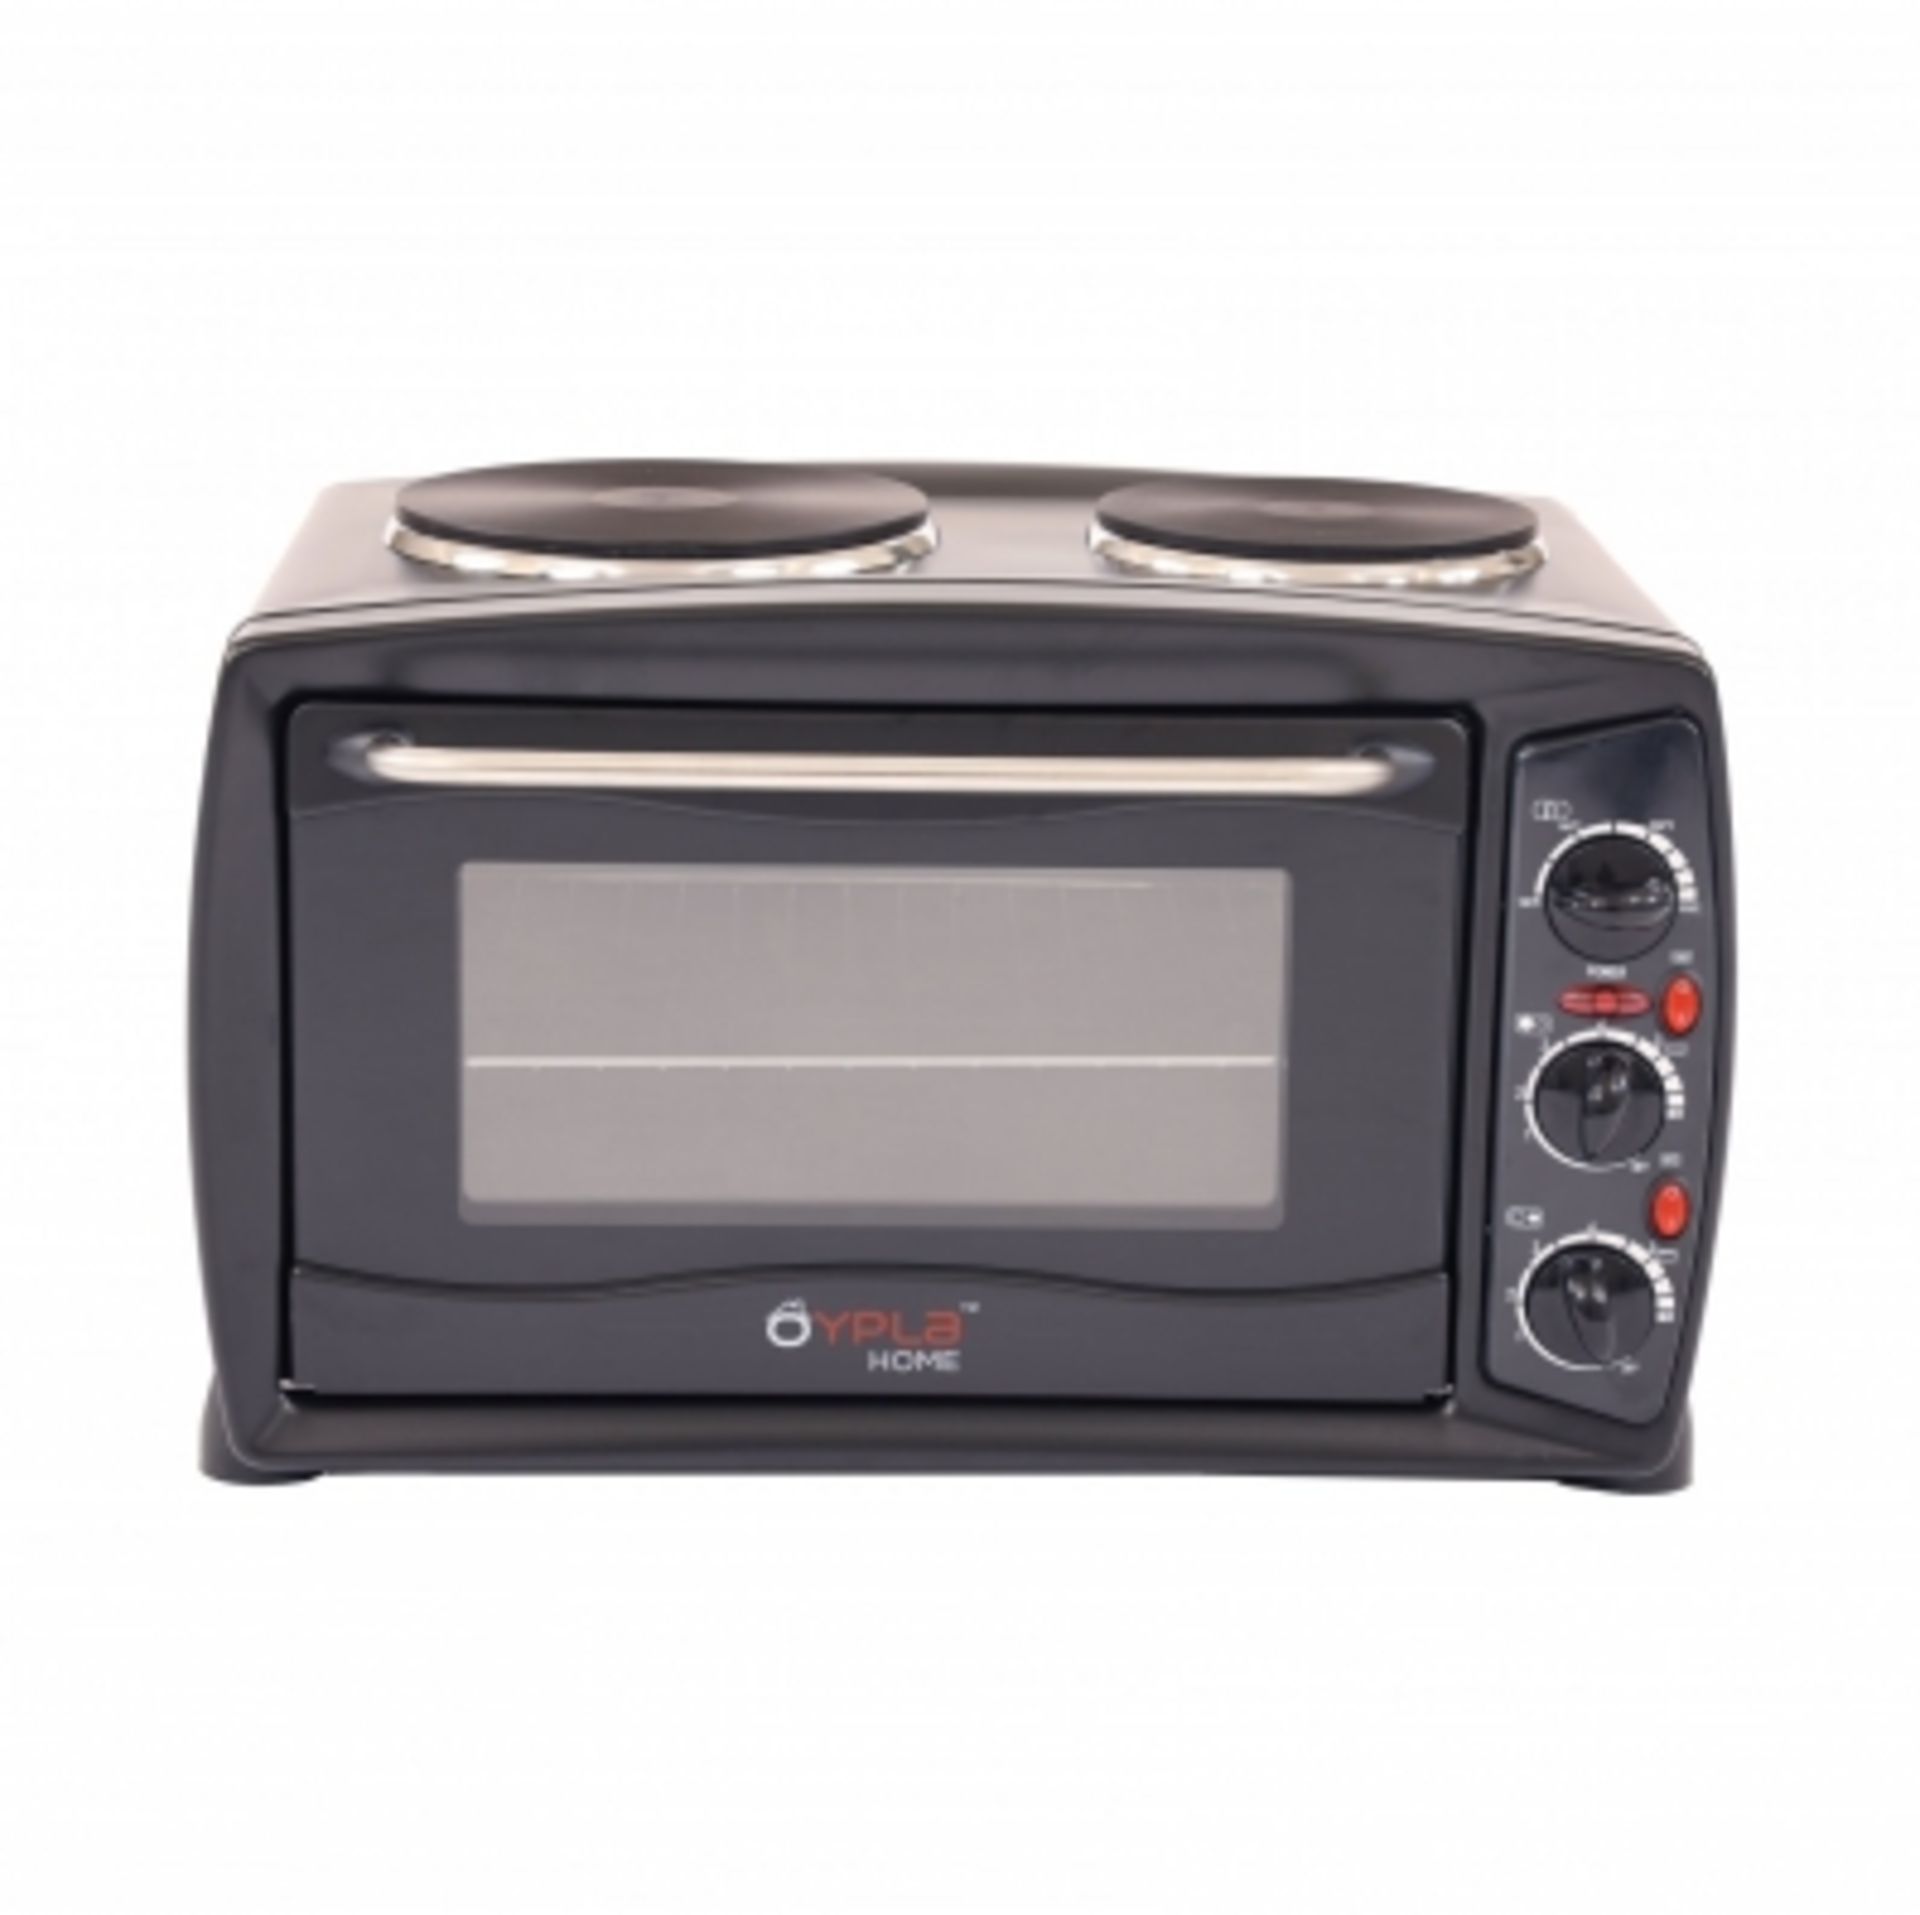 (SK9) Mini Oven c/w Hot Plates And Grill The 26 litre mini oven & grill with double hob is l... - Image 2 of 3